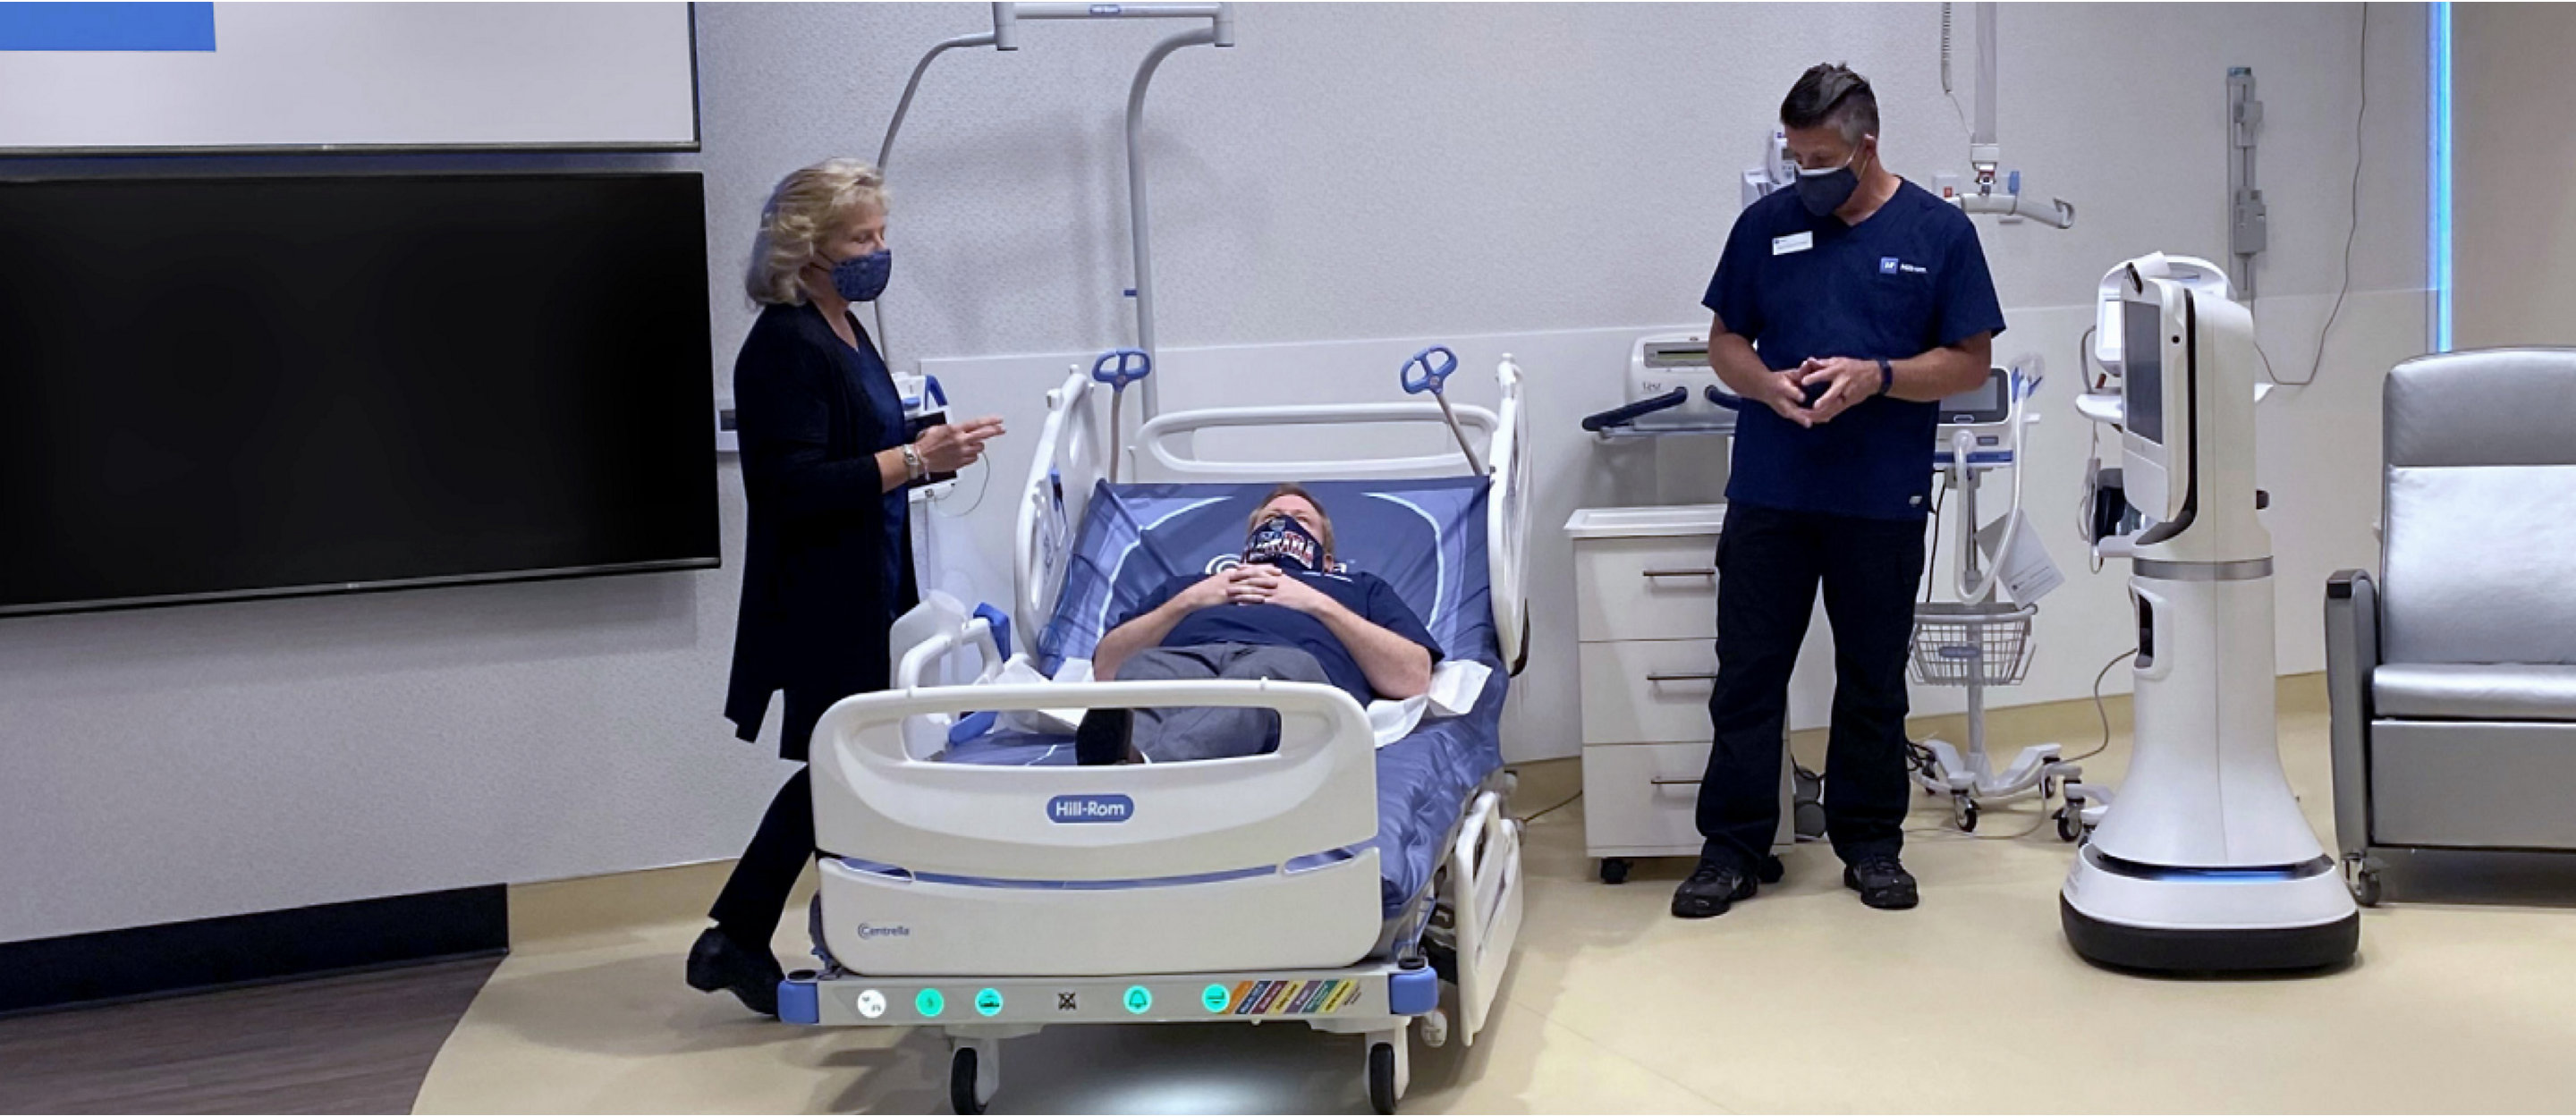 A patient smiles in a Centrella Smart+ Bed. Her clinician stands near the Graphical Caregiver Interface (GCI) Touchscreen.